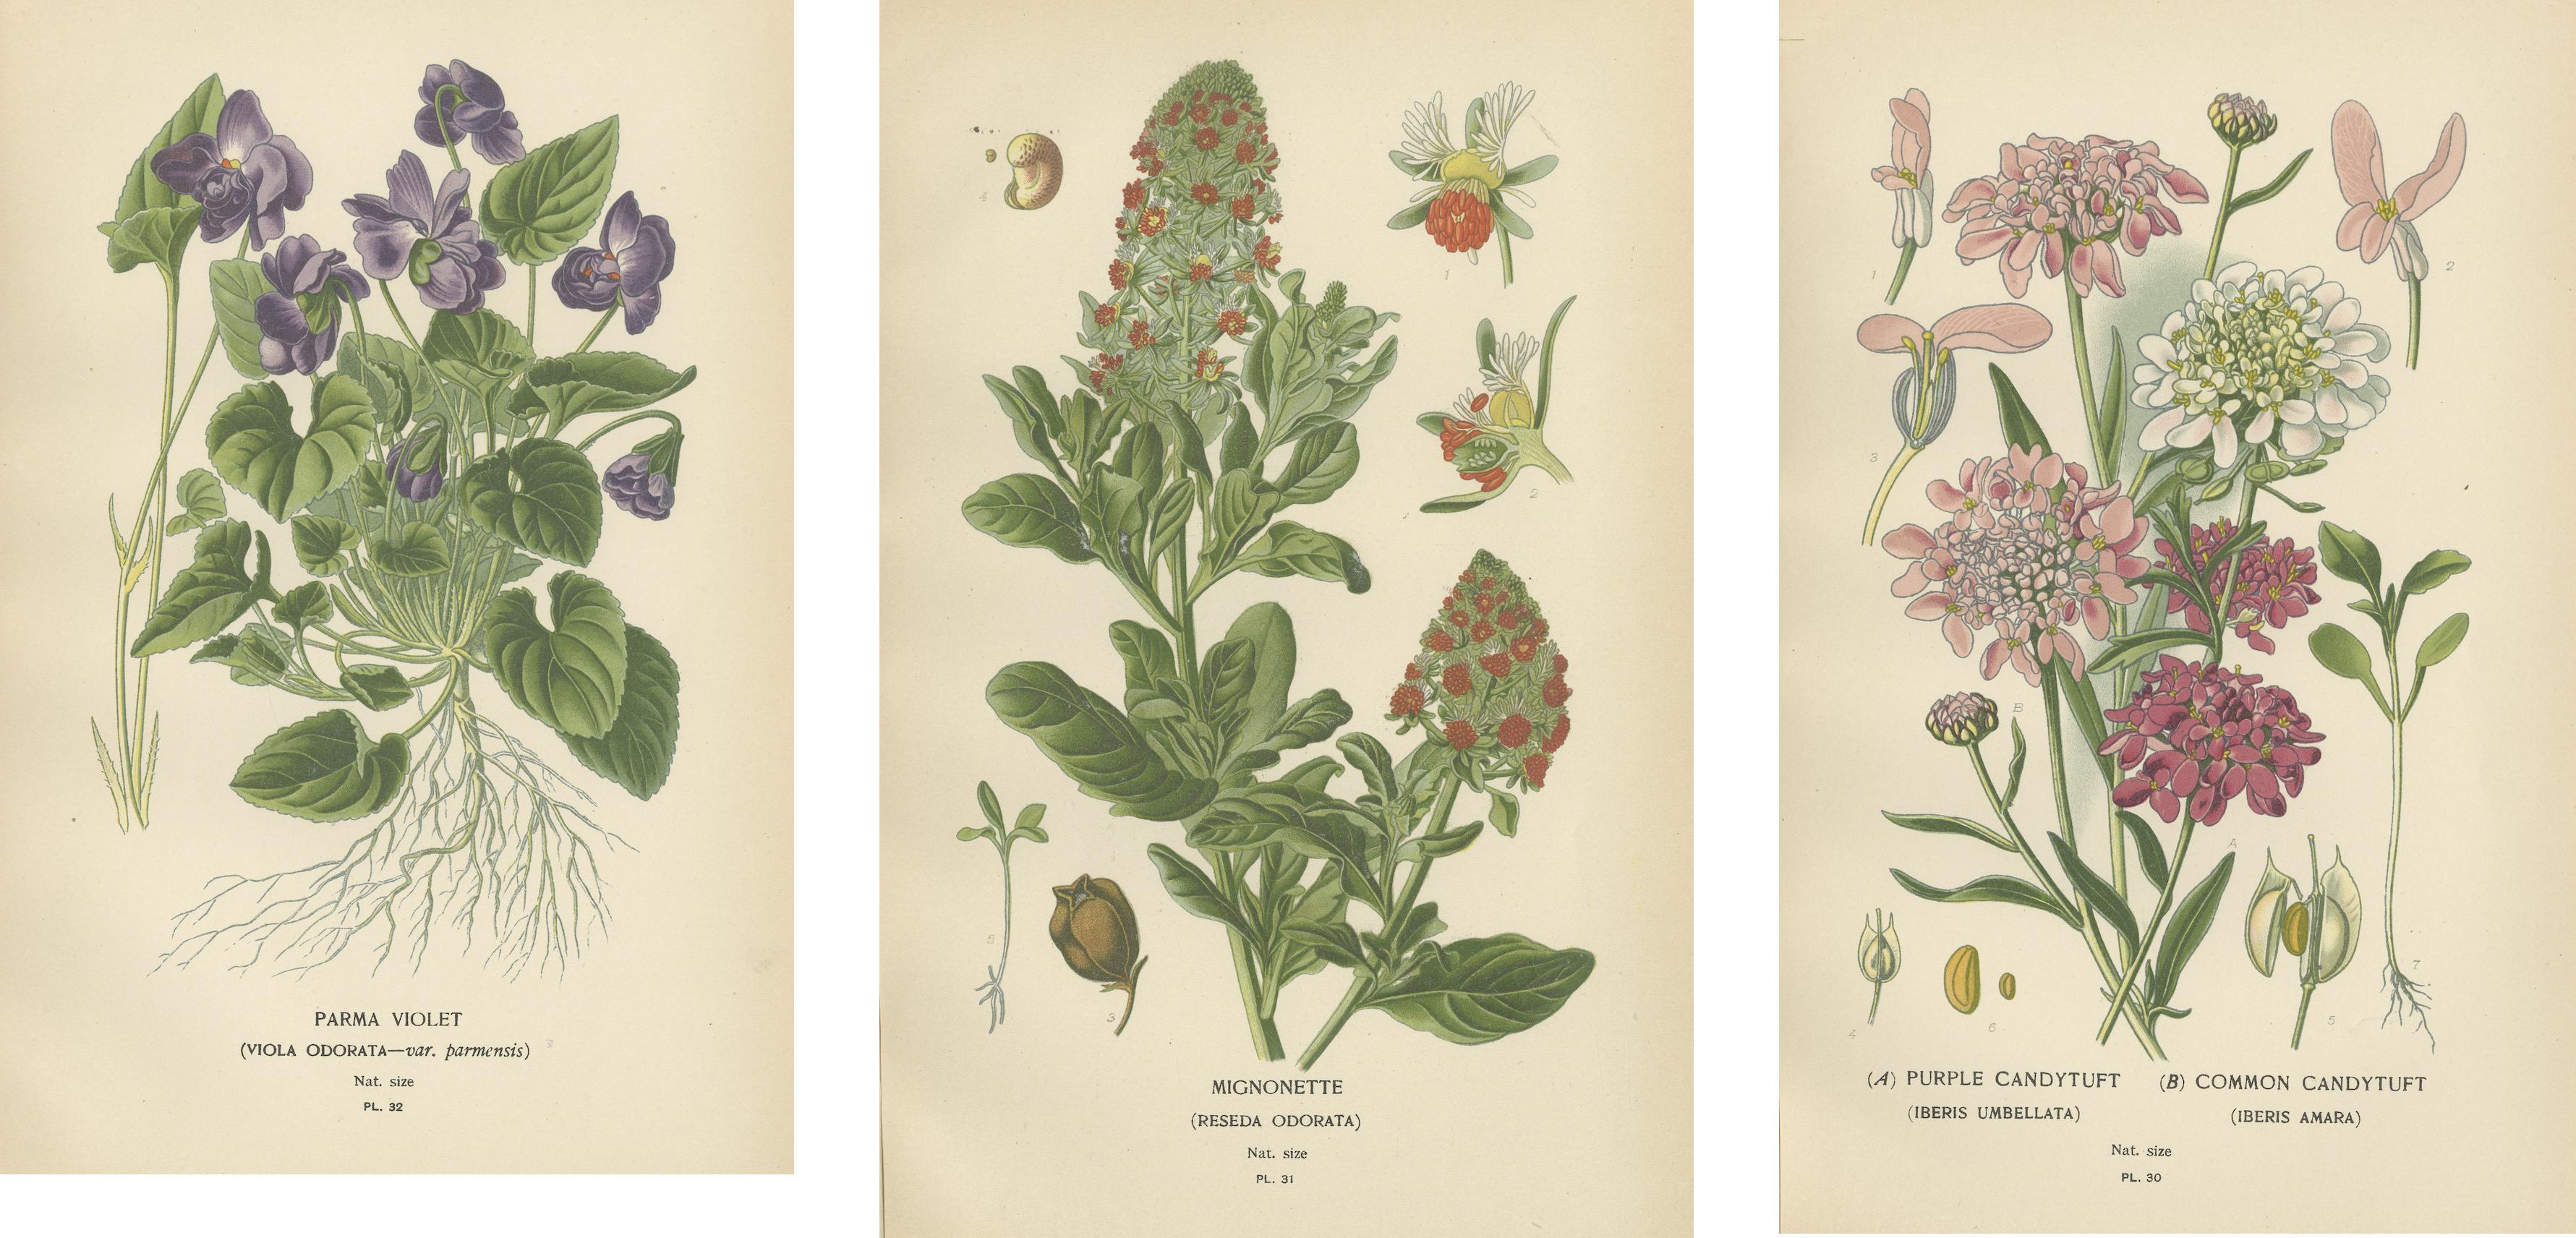 Paper Fragrant Heirlooms: Aromatic Blossoms from Edward Step's Collection, 1896